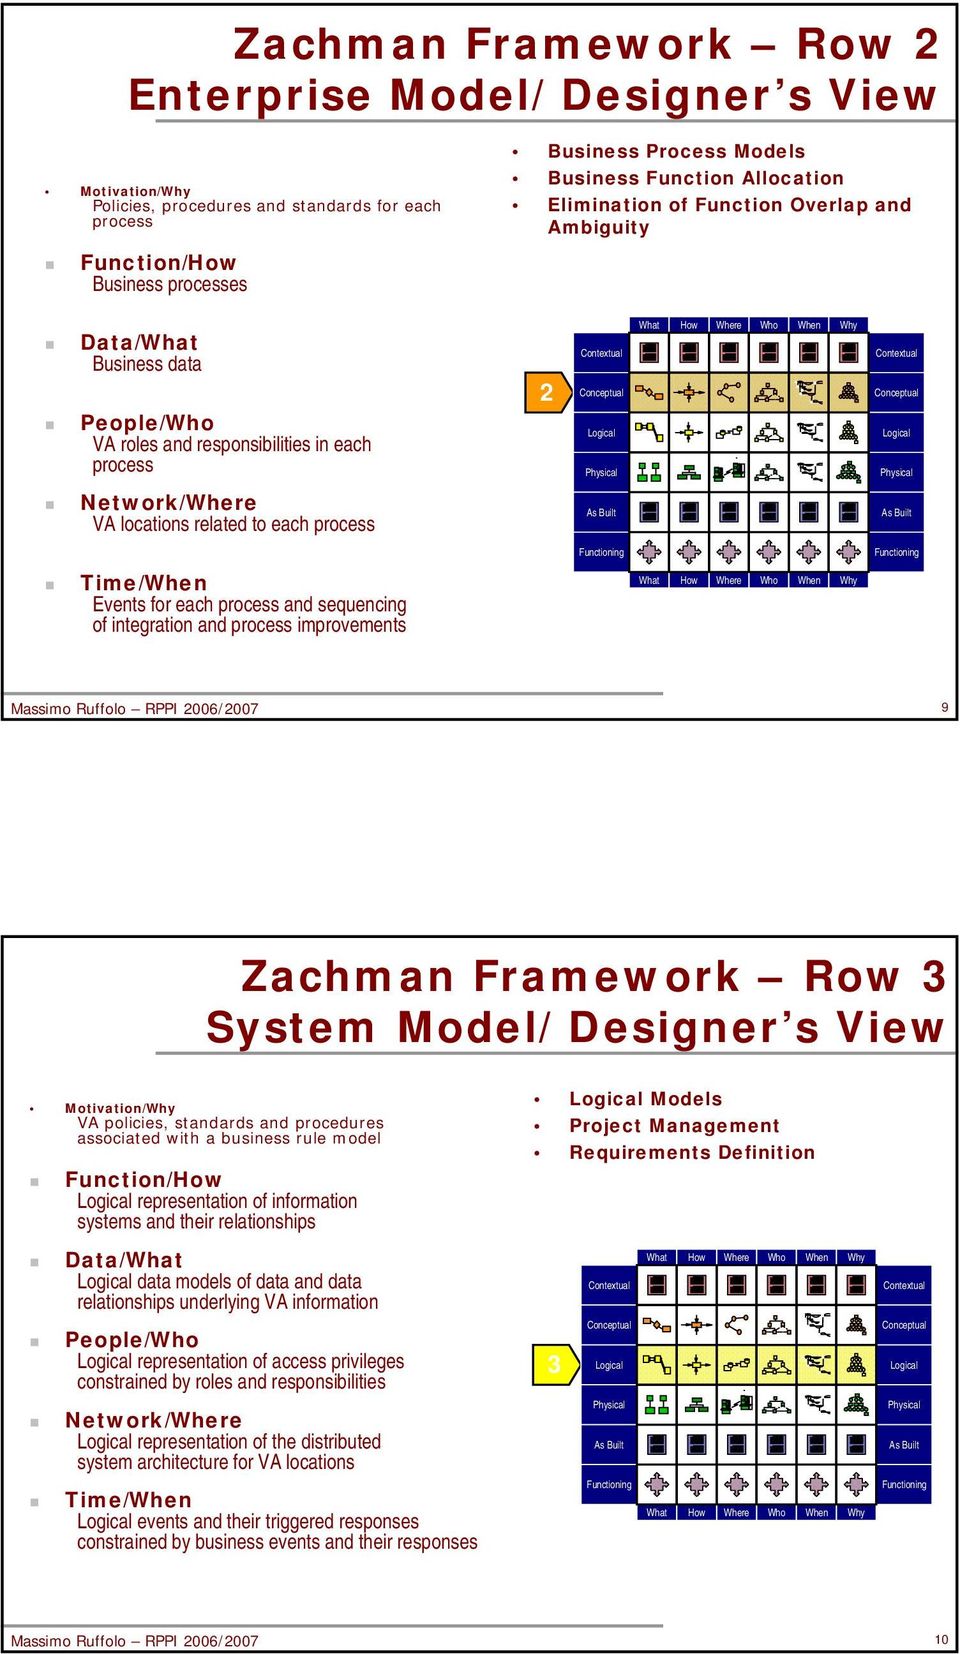 each process and sequencing of integration and process improvements Massimo Ruffolo RPPI 2006/2007 9 Zachman Framework Row 3 System Model/Designer s View Motivation/ VA policies, standards and